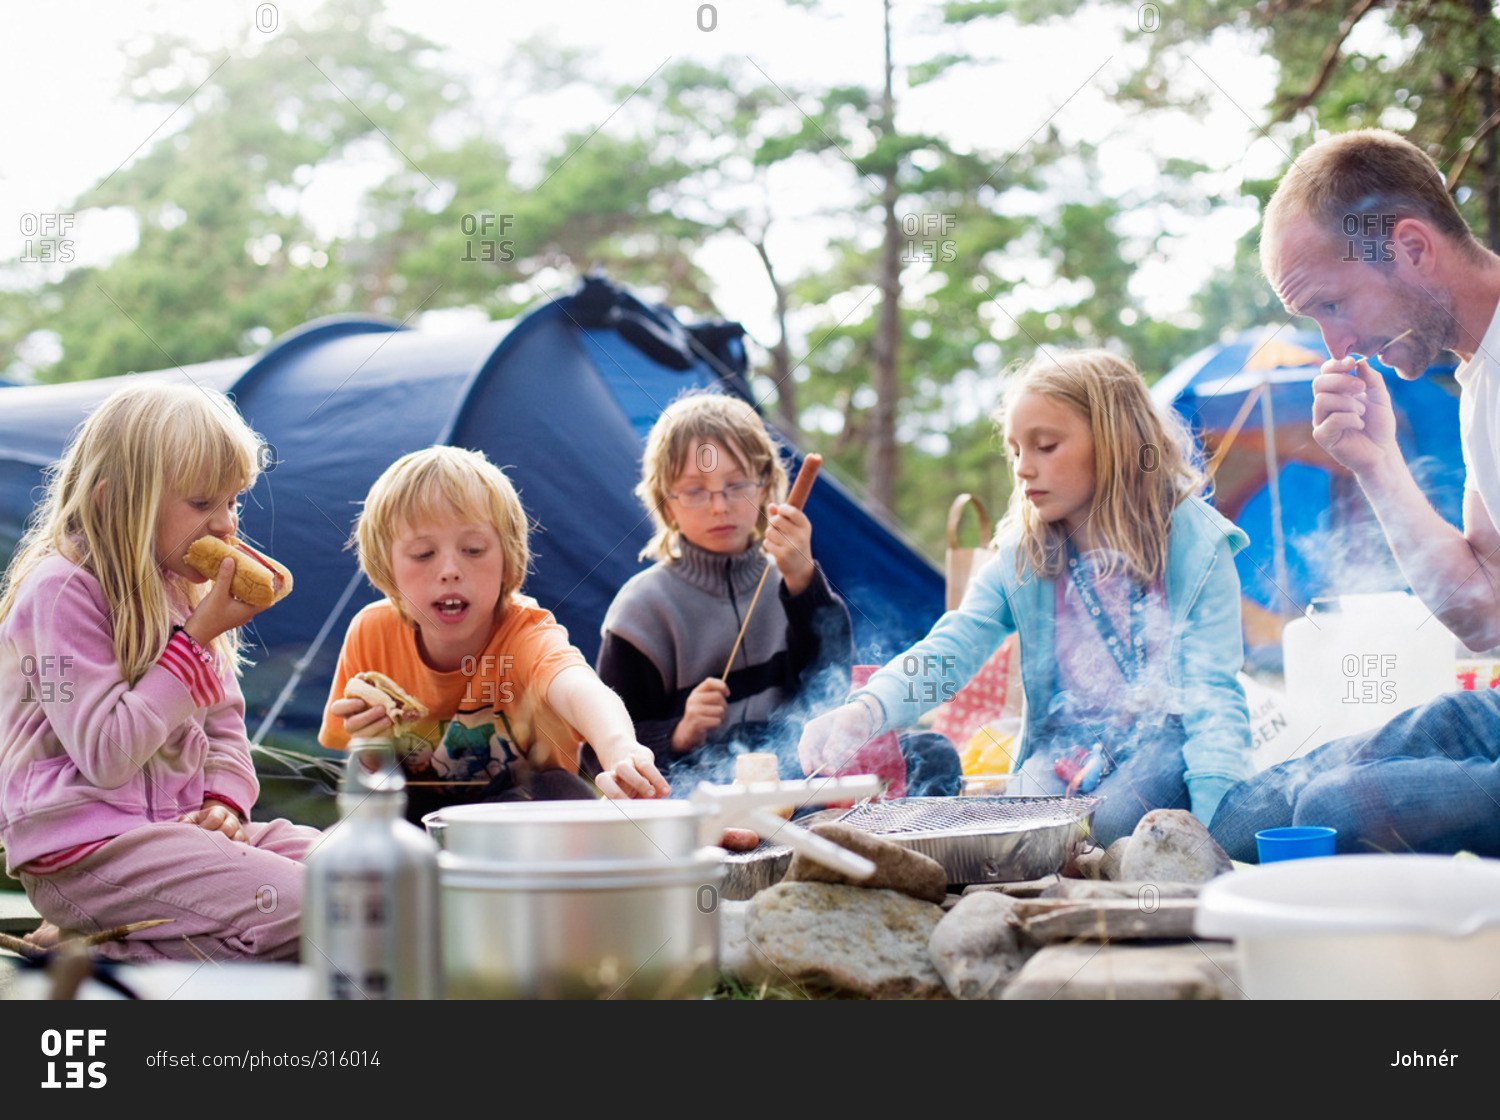 A family eating food outside a tent, Sweden